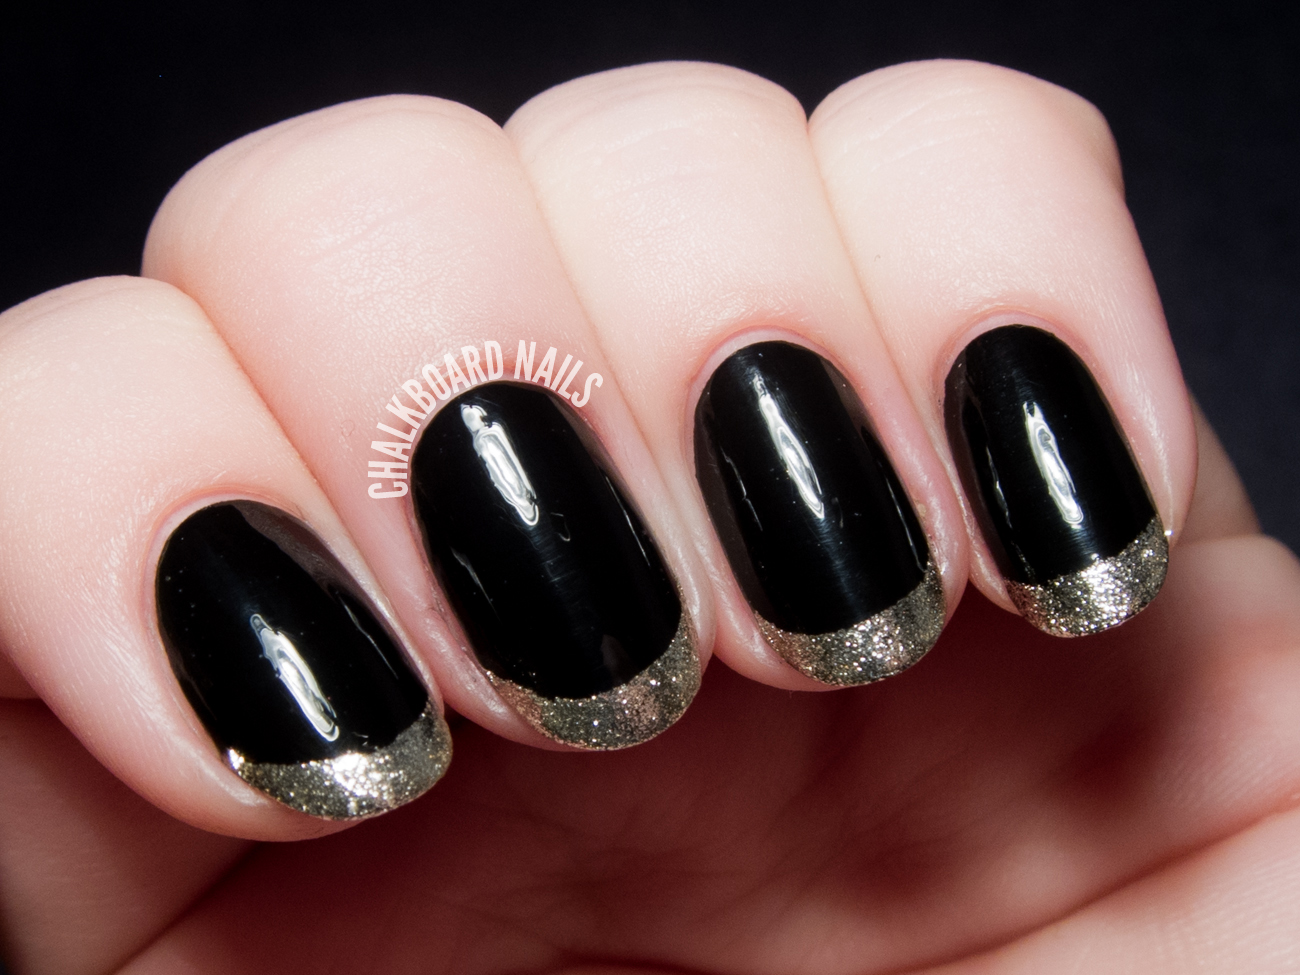 Metallic gold French tips by @chalkboardnails